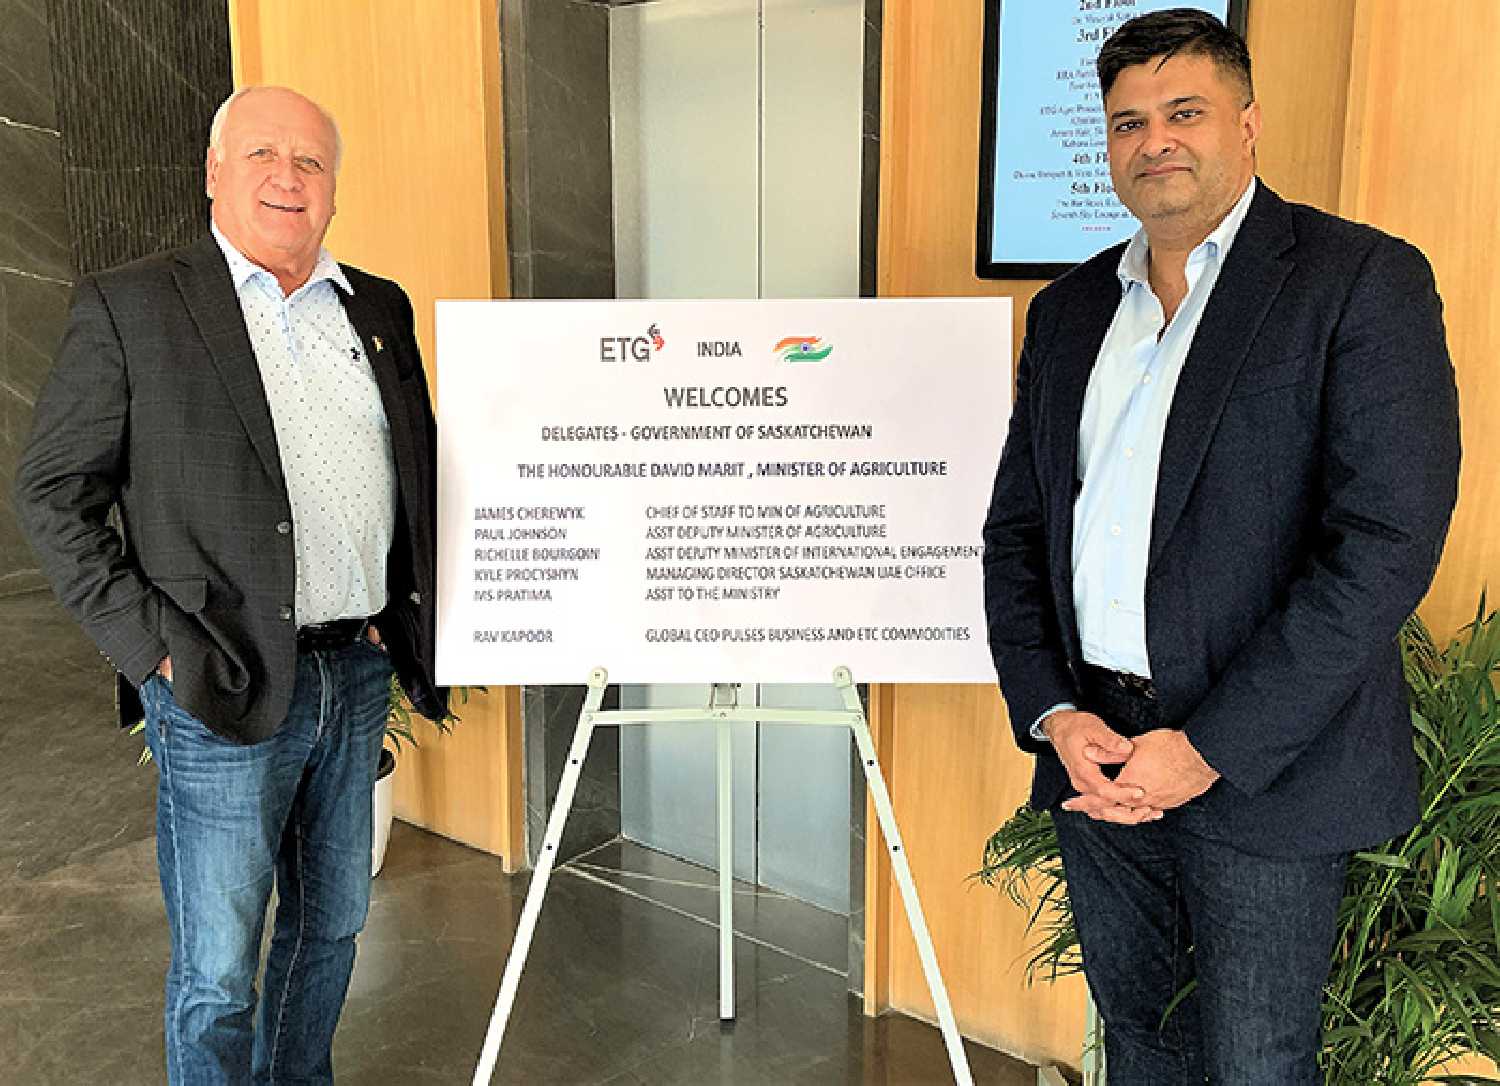 Saskatchewan’s Minister of Agriculture David Marit with Global CEO of ETG Commodities Rav Kapoor, during his trade mission in India from Feb. 13 to 22. ETG Commodities has six facilities located in Saskatchewan, and is one of the largest importers and processors of pulses in India.